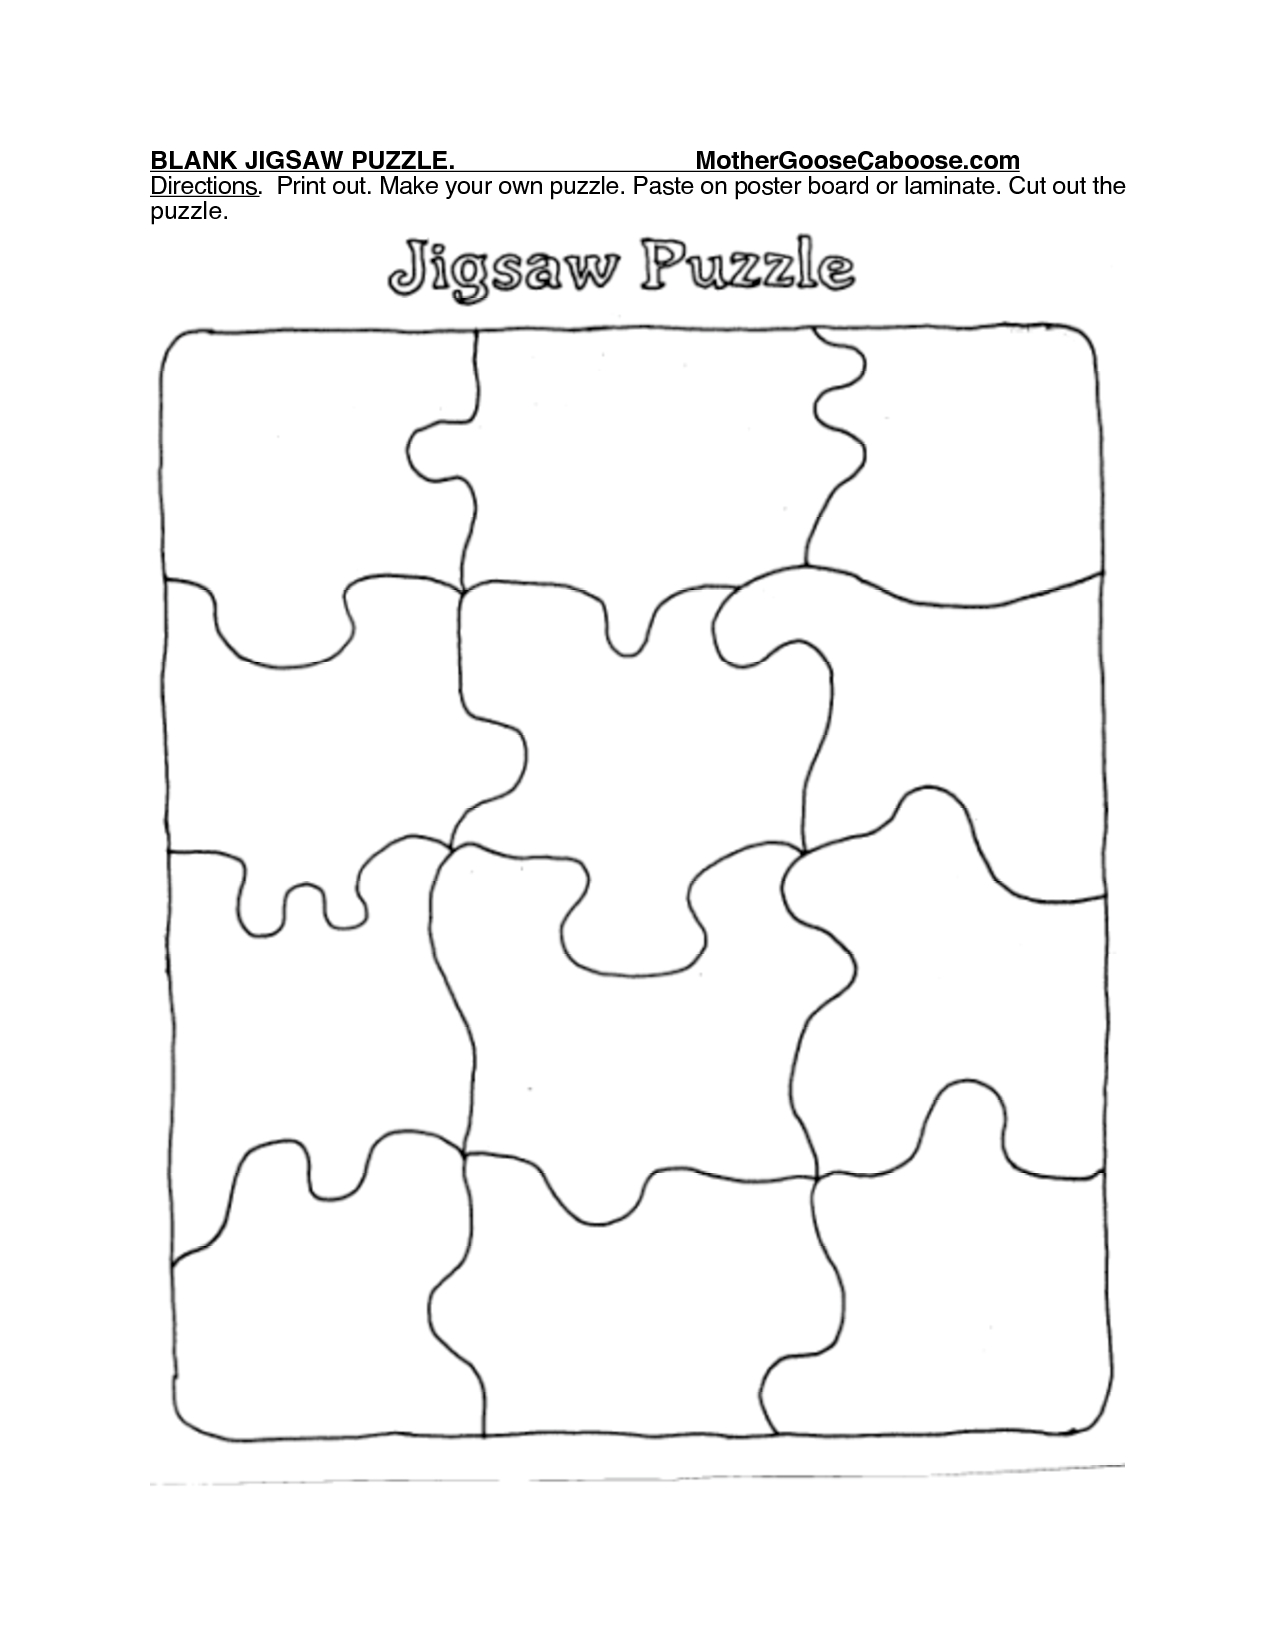 Printable Puzzle Piece Template | Search Results | New Calendar - Printable Jigsaw Puzzles 6 Pieces